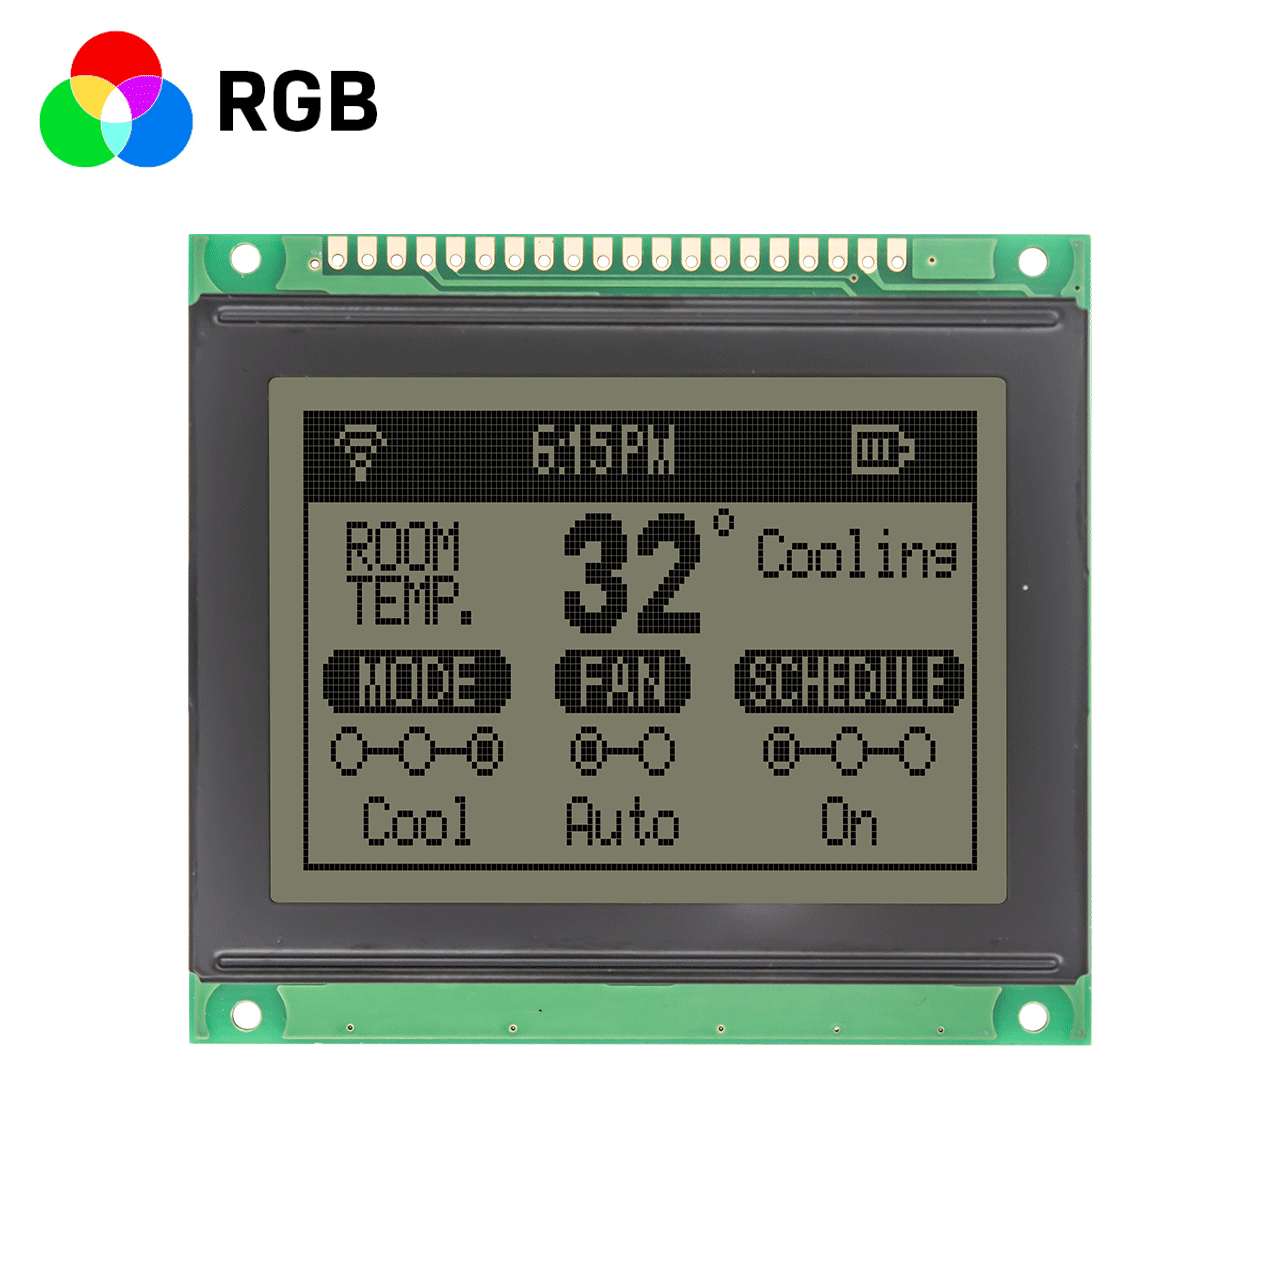 3" Graphic LCD 168x24 LCD module, FSTN front display, compatible with KS108, RGB red, green and blue backlight